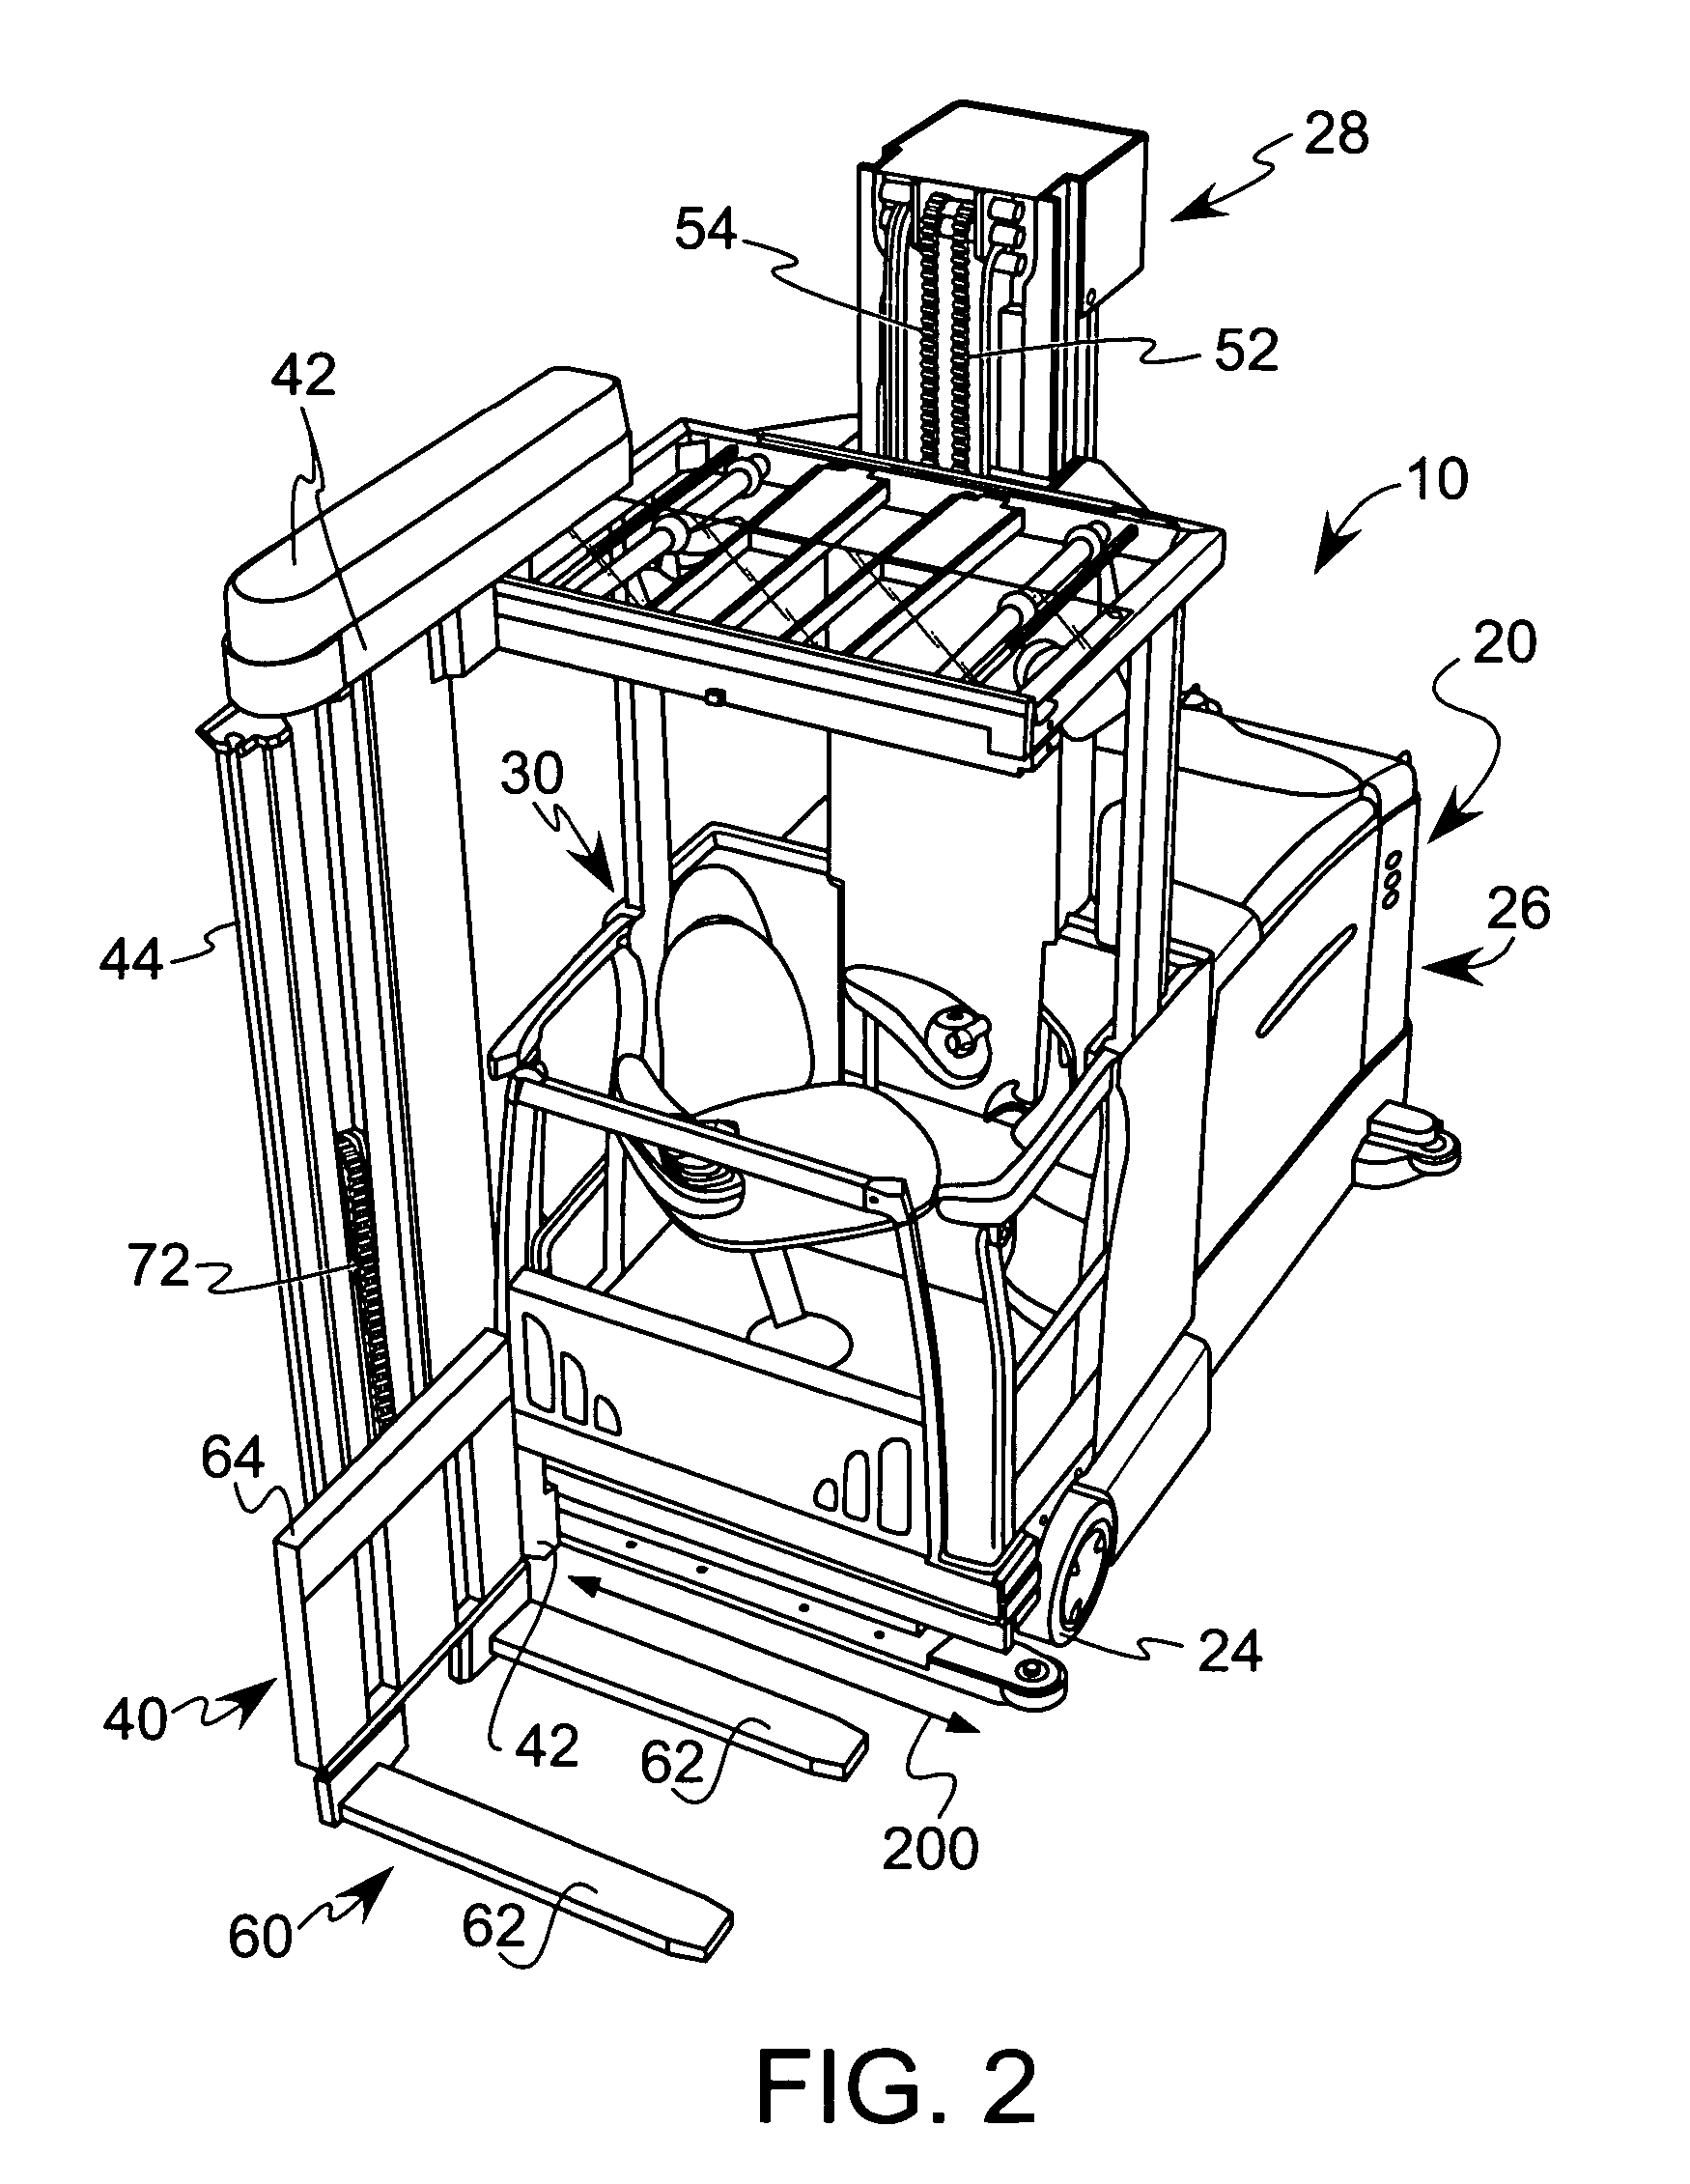 Electronically controlled valve for a materials handling vehicle